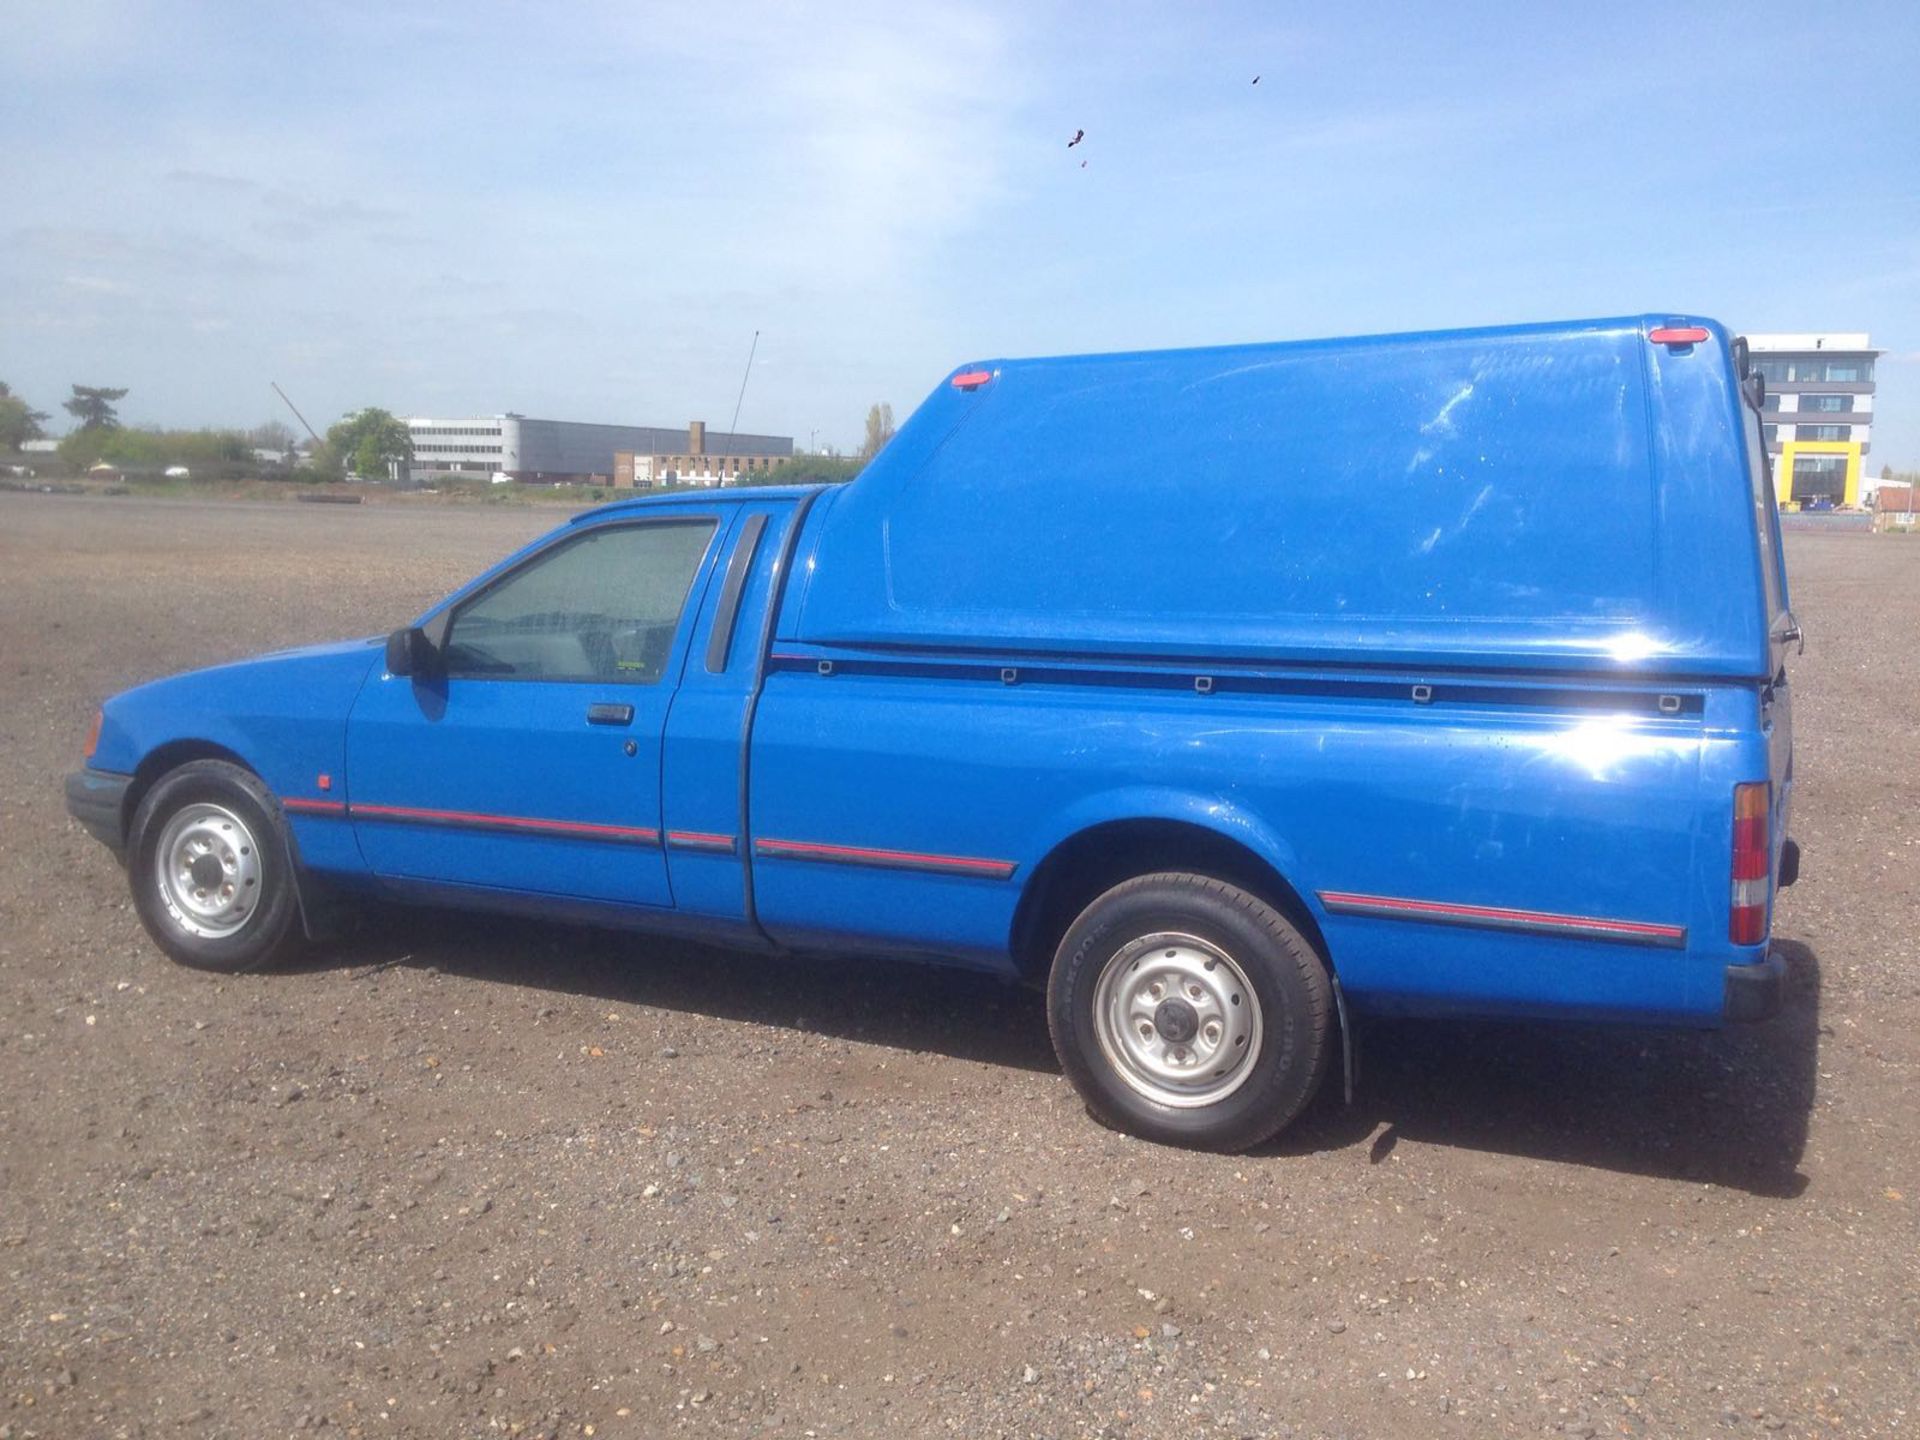 Ford P100 pickup, 1.8 turbo diesel 1991/J 39,000 miles with truckman top 2 owners - Image 2 of 14